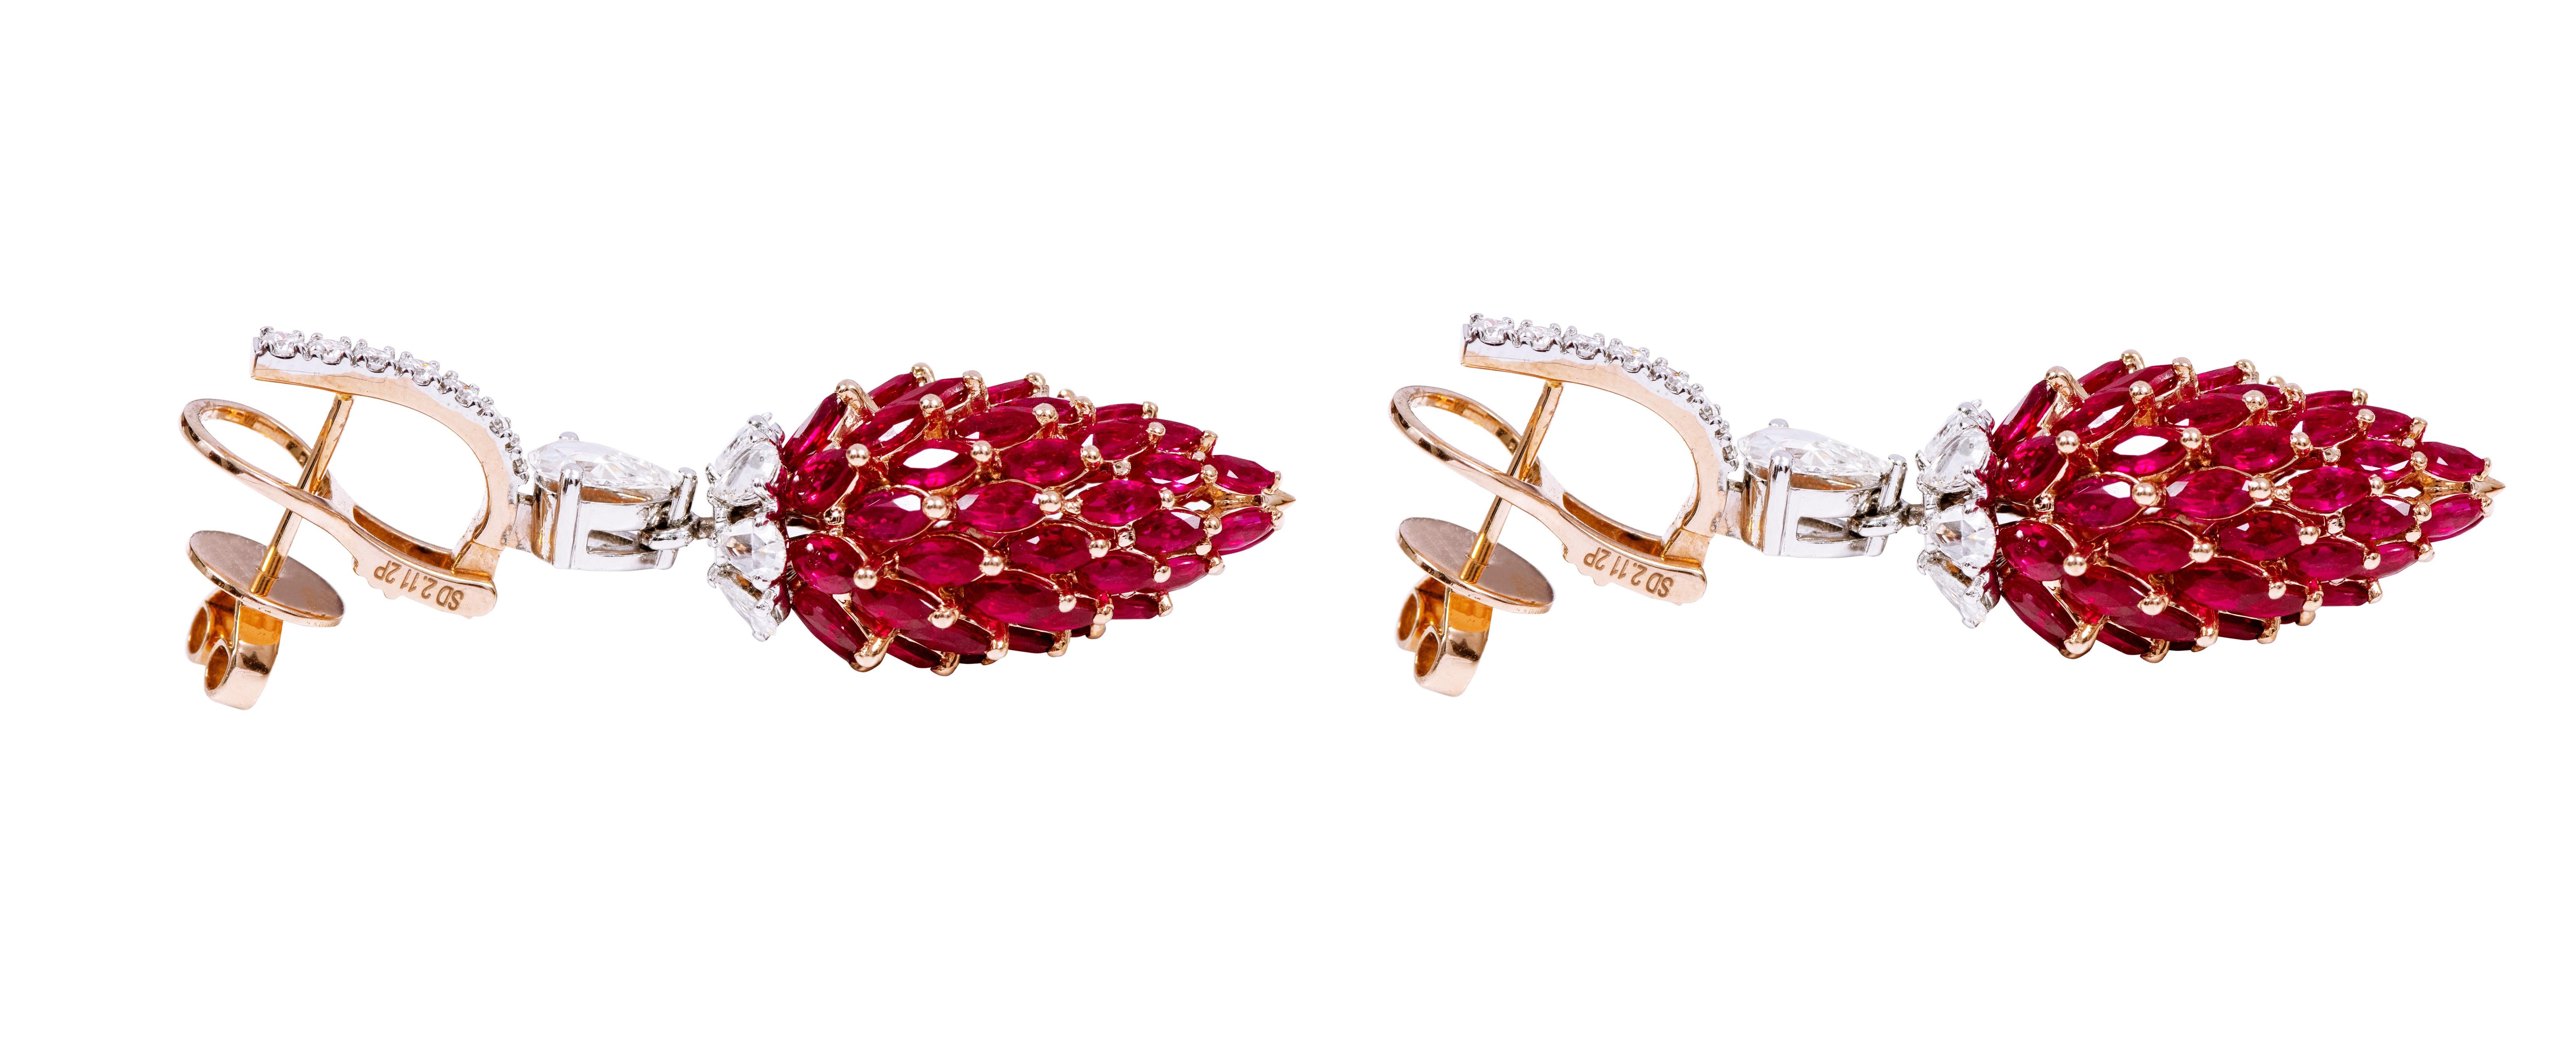 Contemporary 18 Karat Gold 16.77 Carat Pigeon-Blood Ruby and Diamond Drop Earrings For Sale